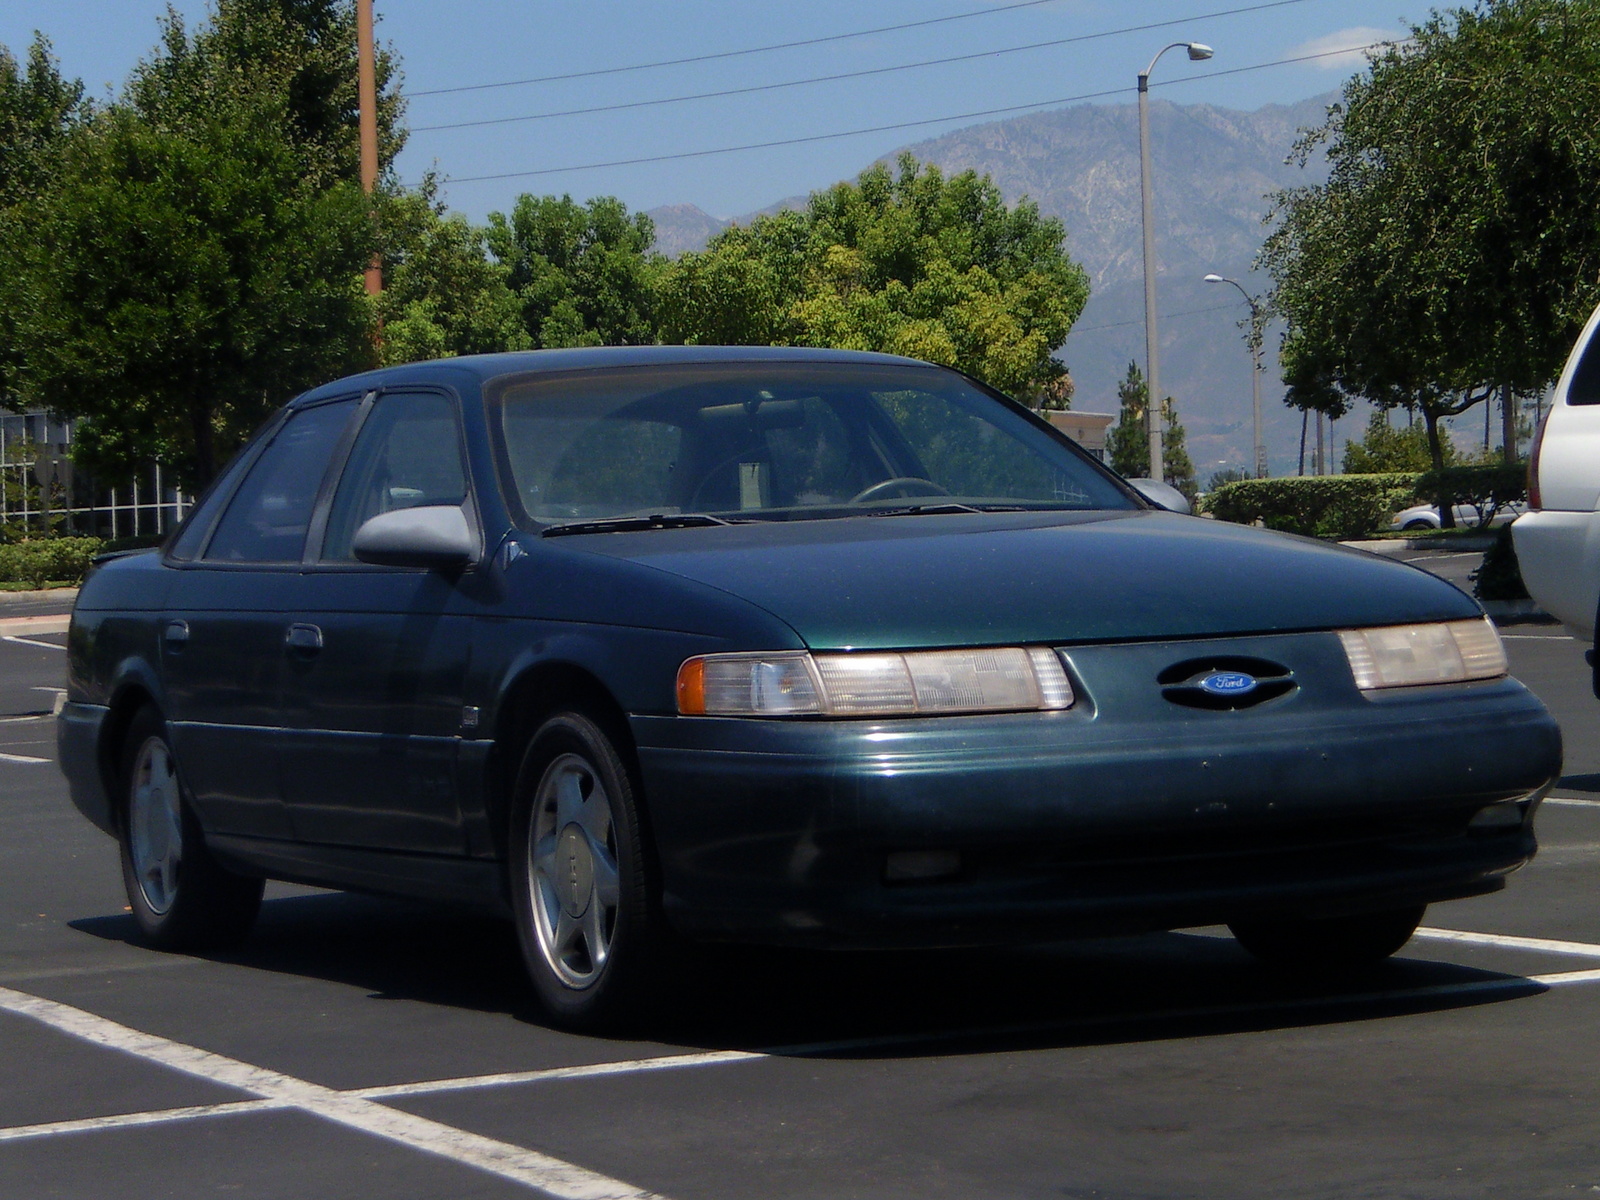 1994 Ford taurus sho review